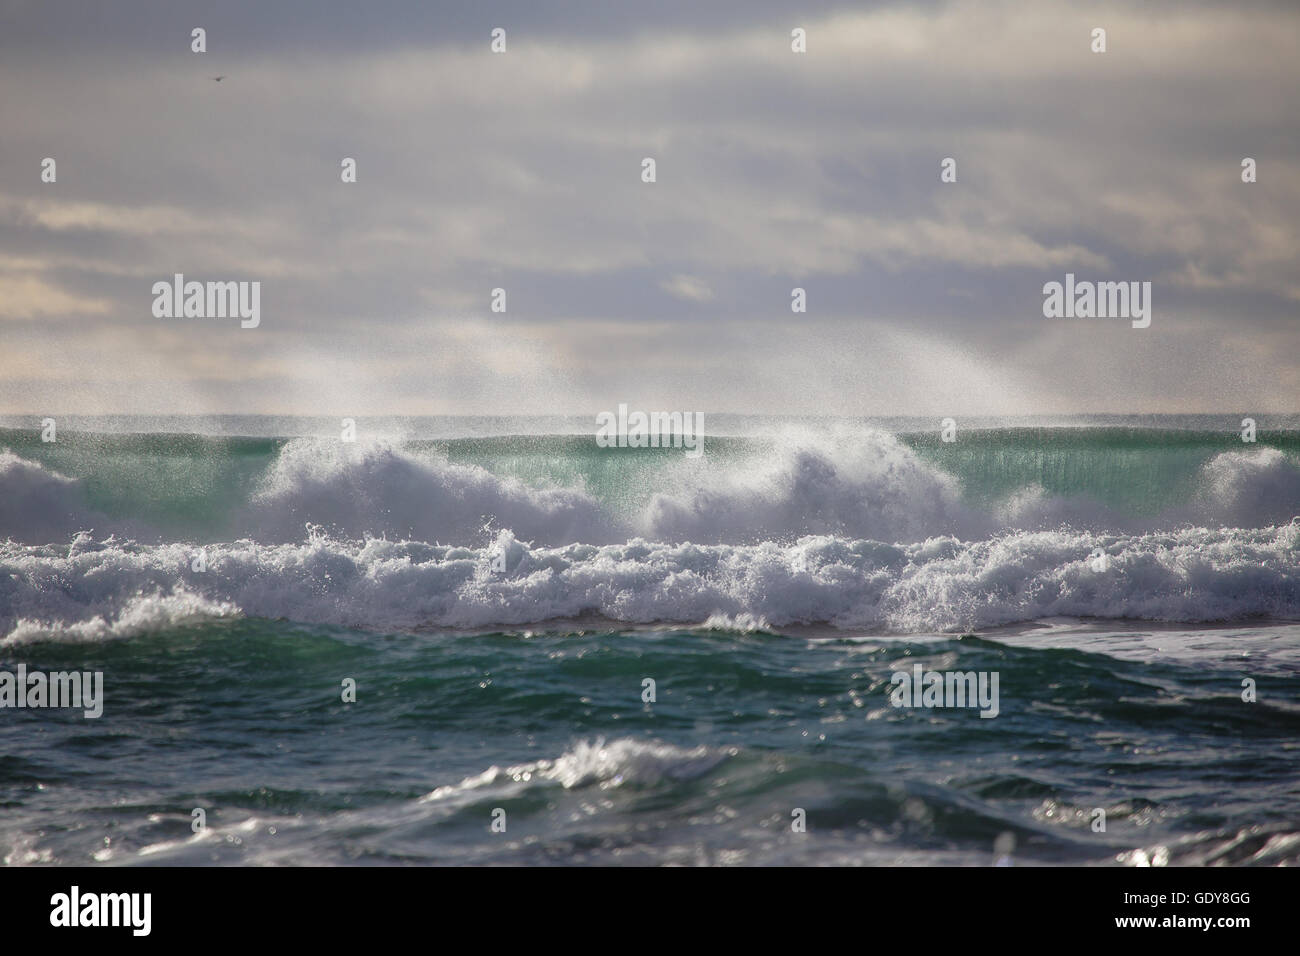 waves of the north atlantic ocean crashing on an icelandic beach after a storm Stock Photo